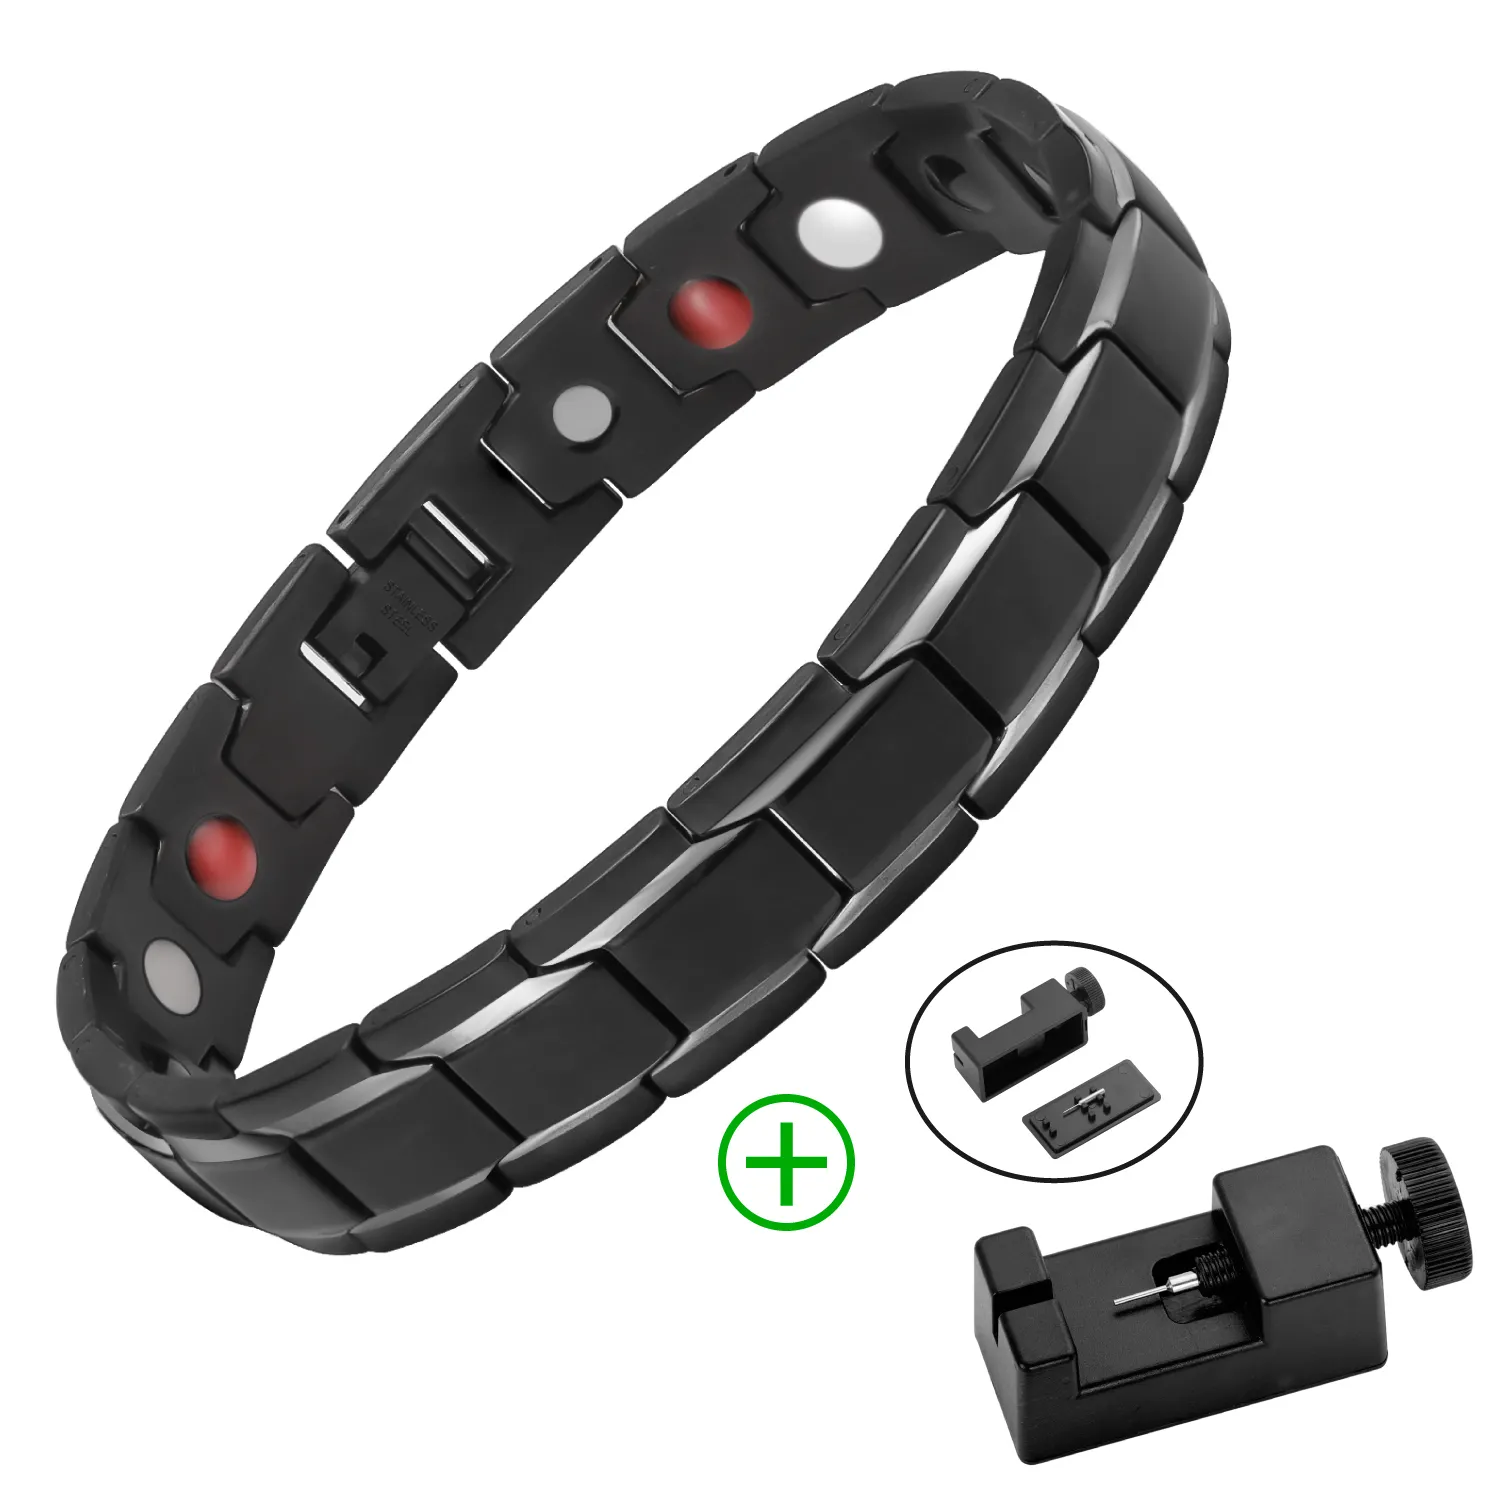 Bio Magnetic Bracelet Chain Healing, 316L Stainless Steel, 4 Health Care  Elements, FIR Germanium Aion Mens And Womens Braces 230511 From Yujia05,  $9.18 | DHgate.Com